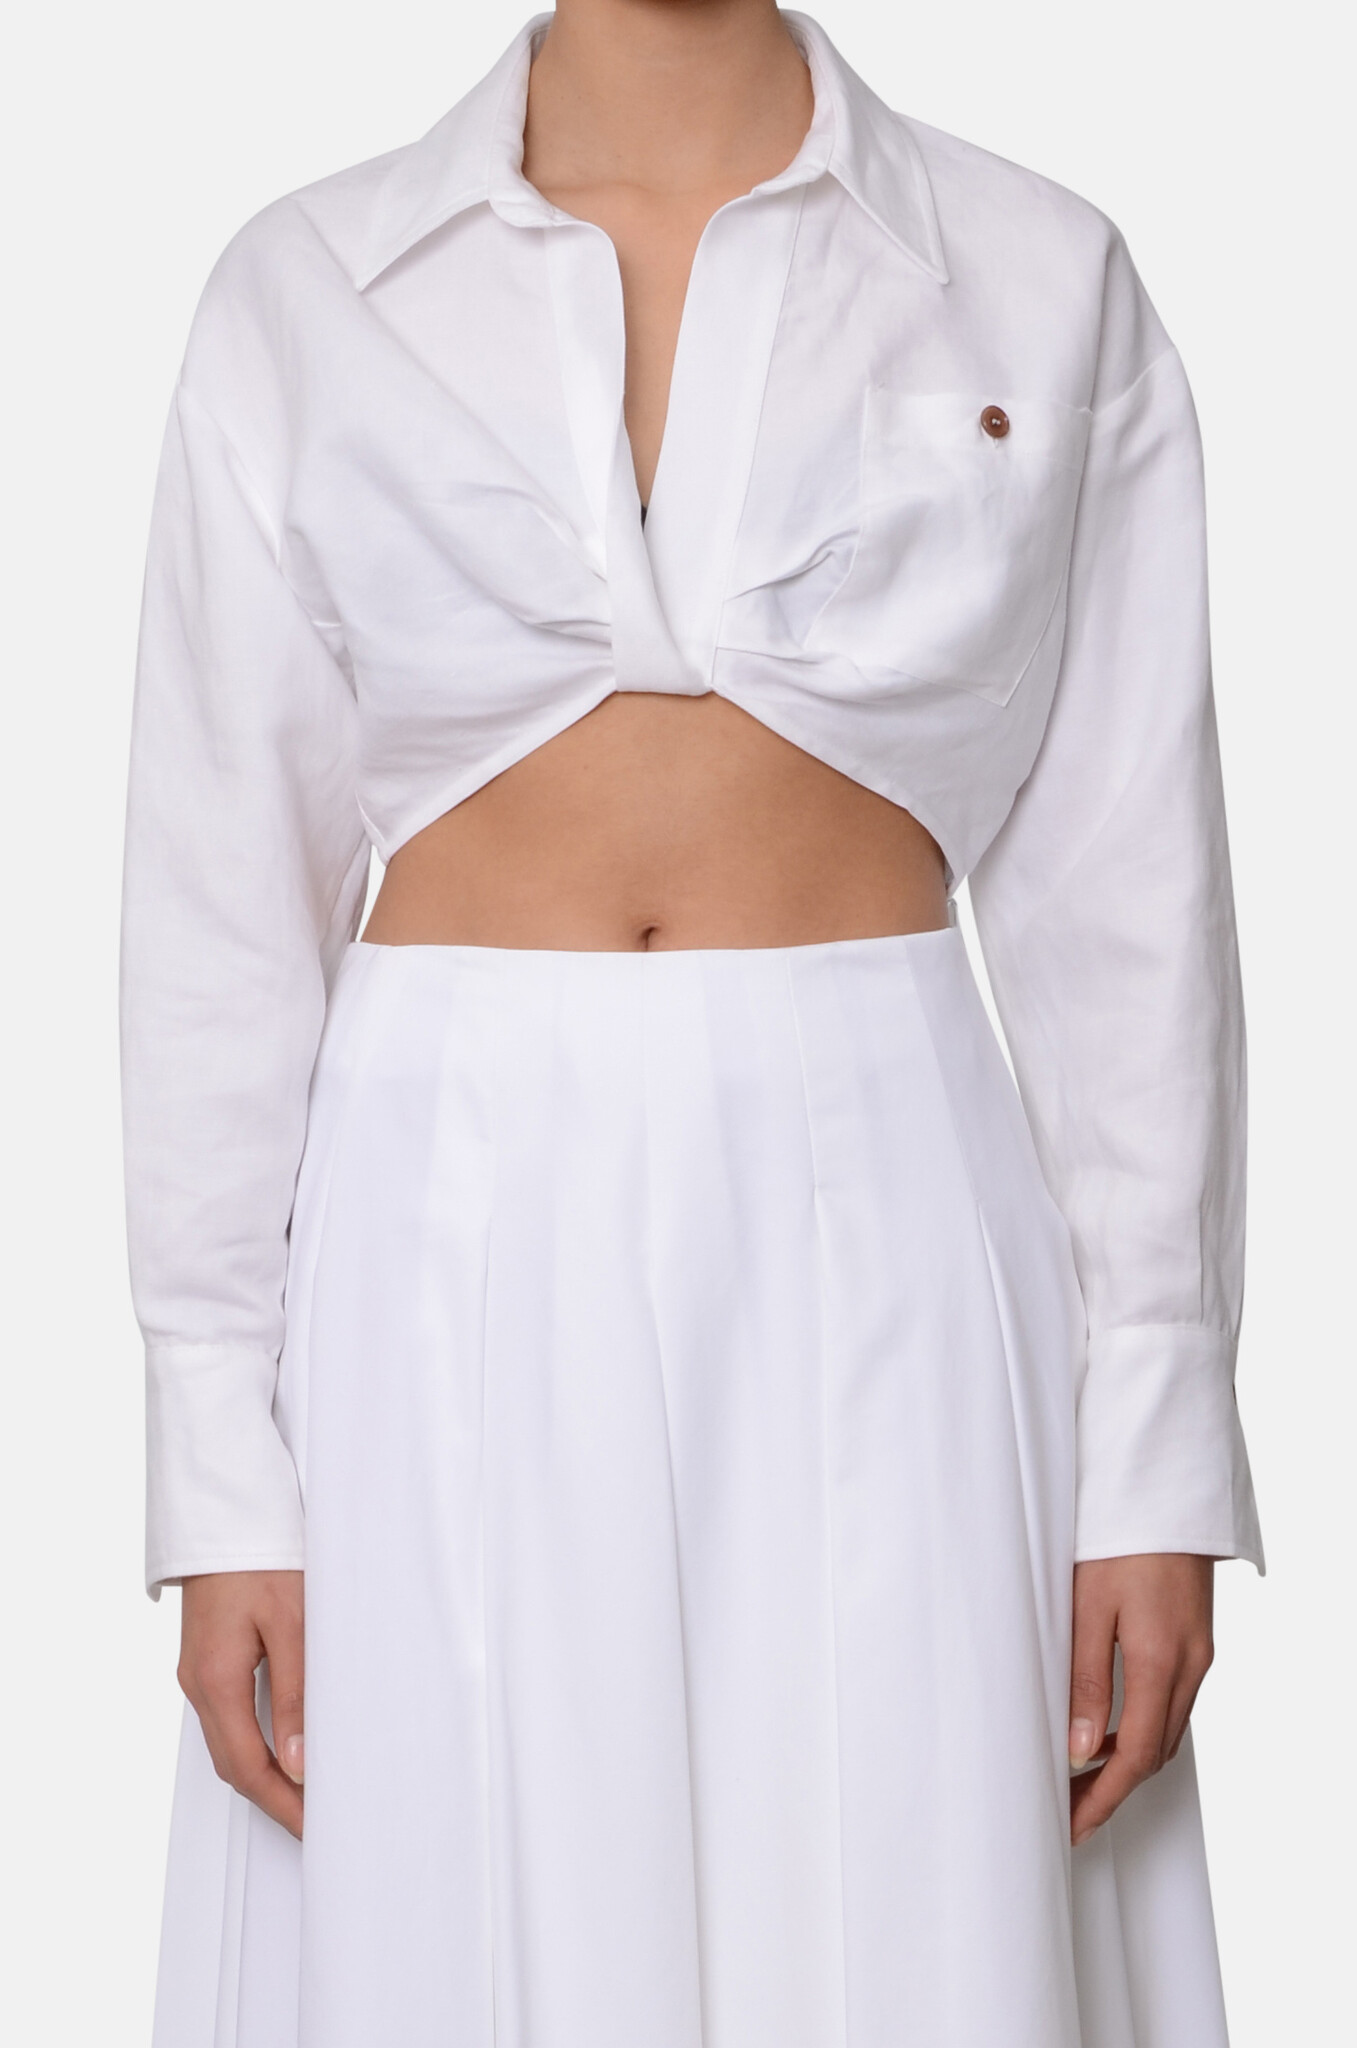 ERIKA CAVALLINI - Twist Front Cropped Linen Blouse in Off-White 